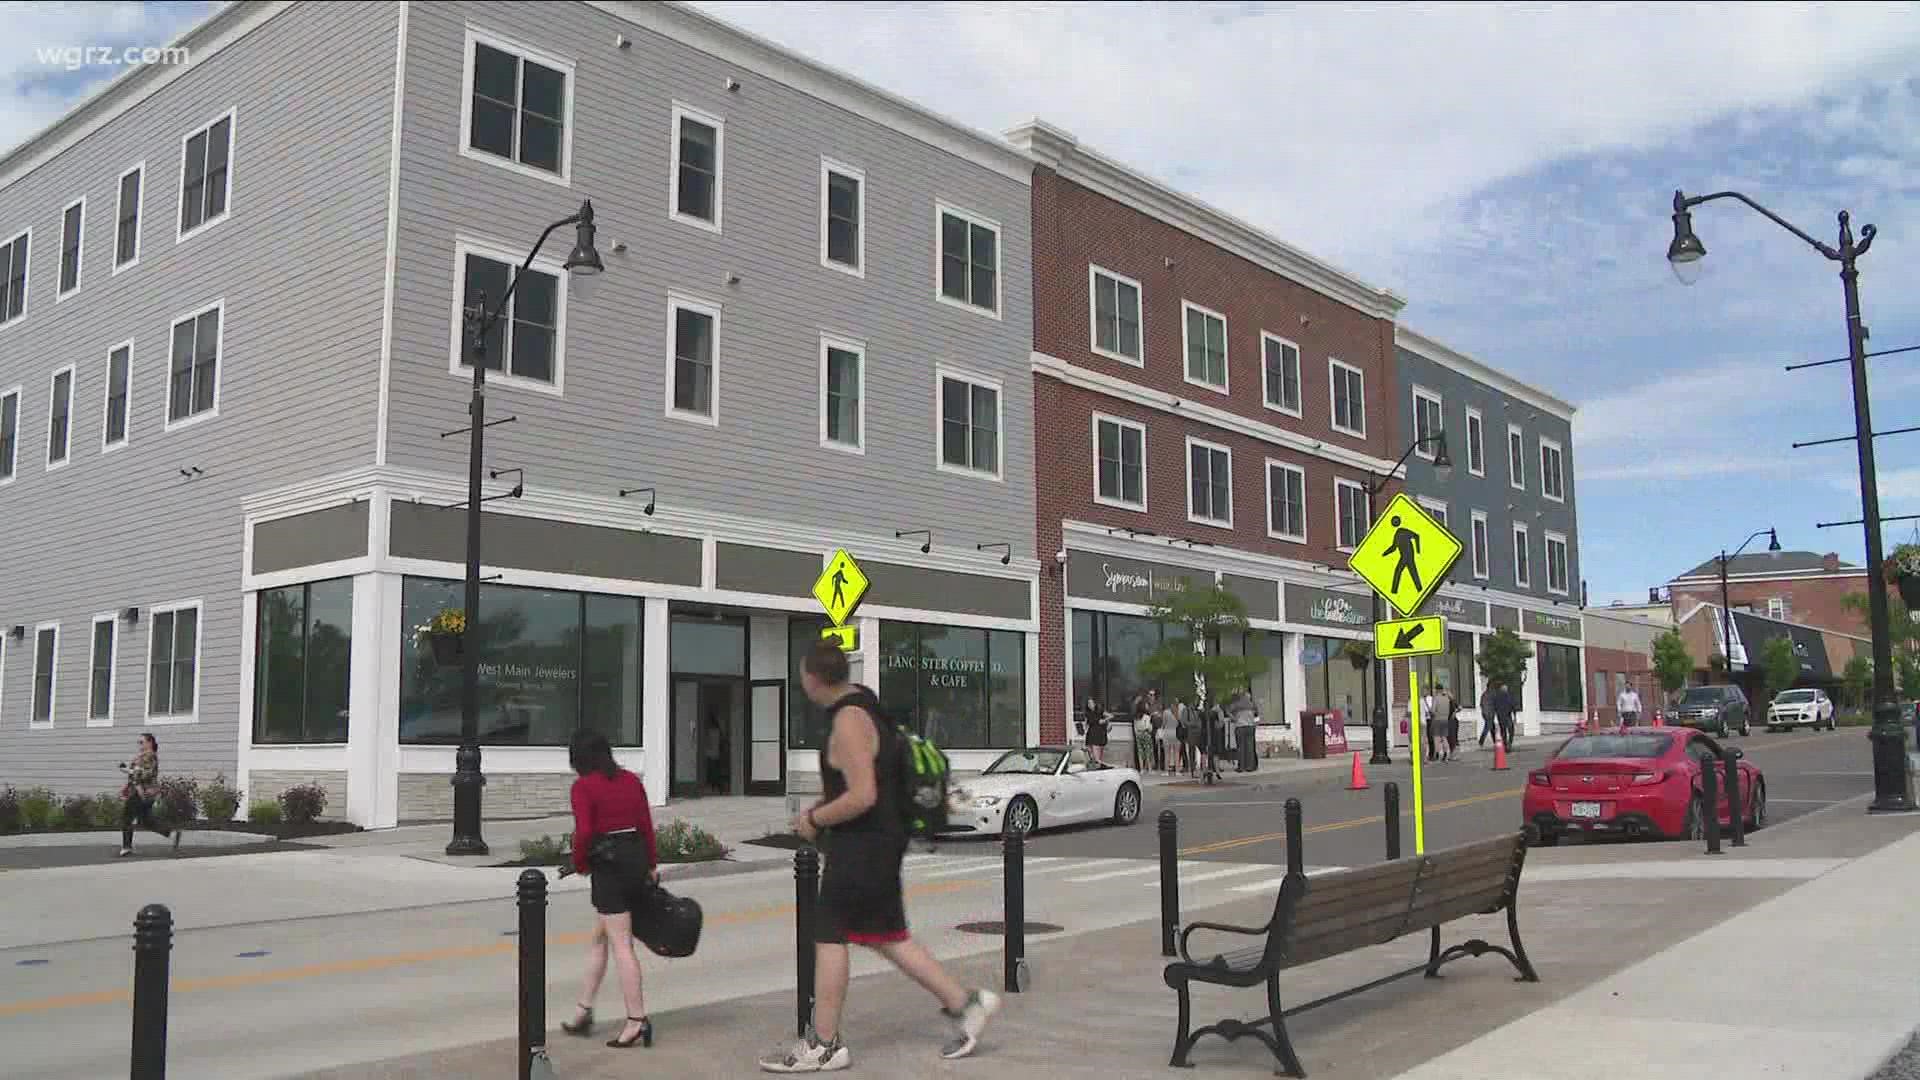 Lancaster village center is now open. 6 businesses and 18 apartments now fill the space on West Main Street.